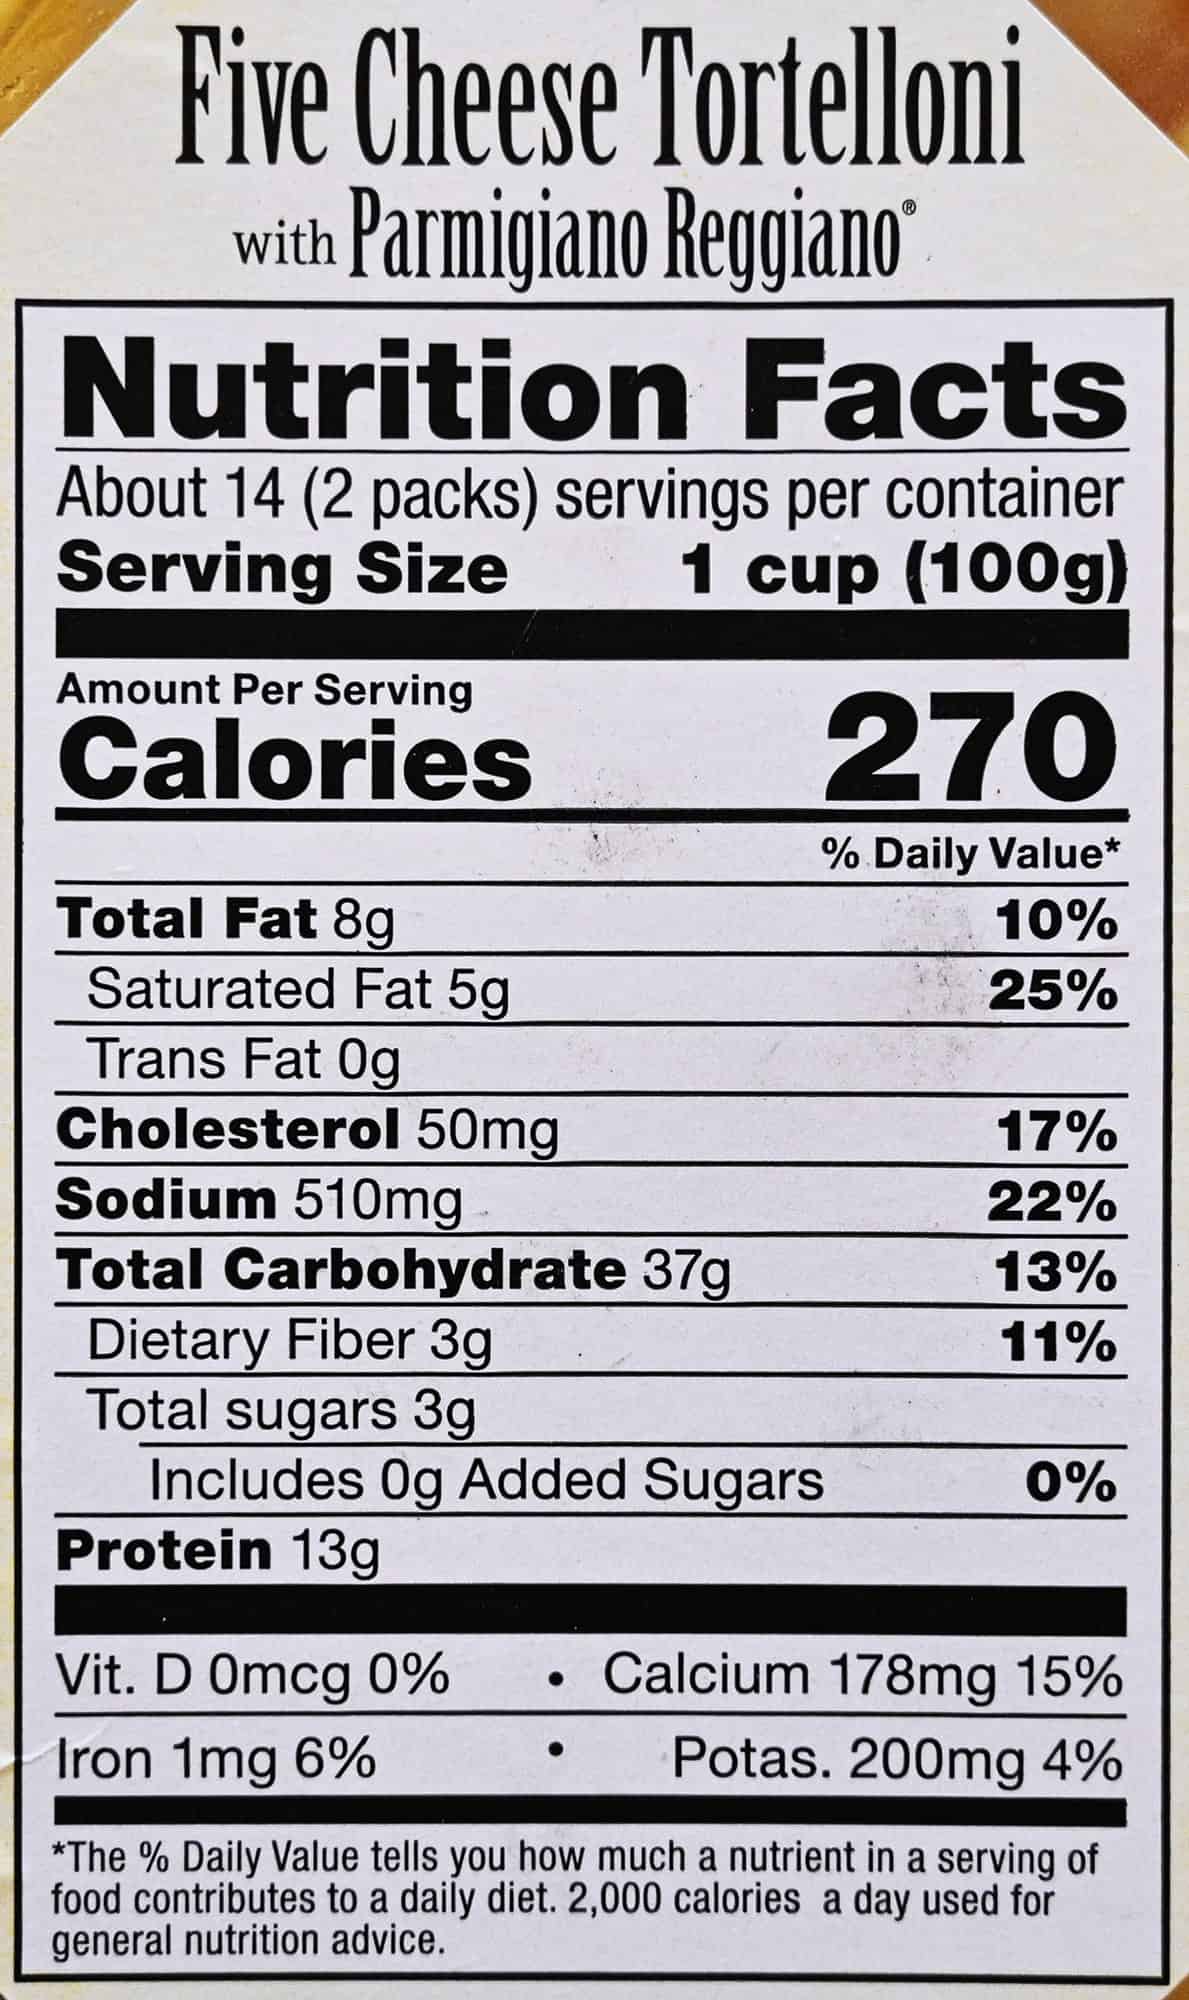 Image of the nutrition facts label from the back of the package.